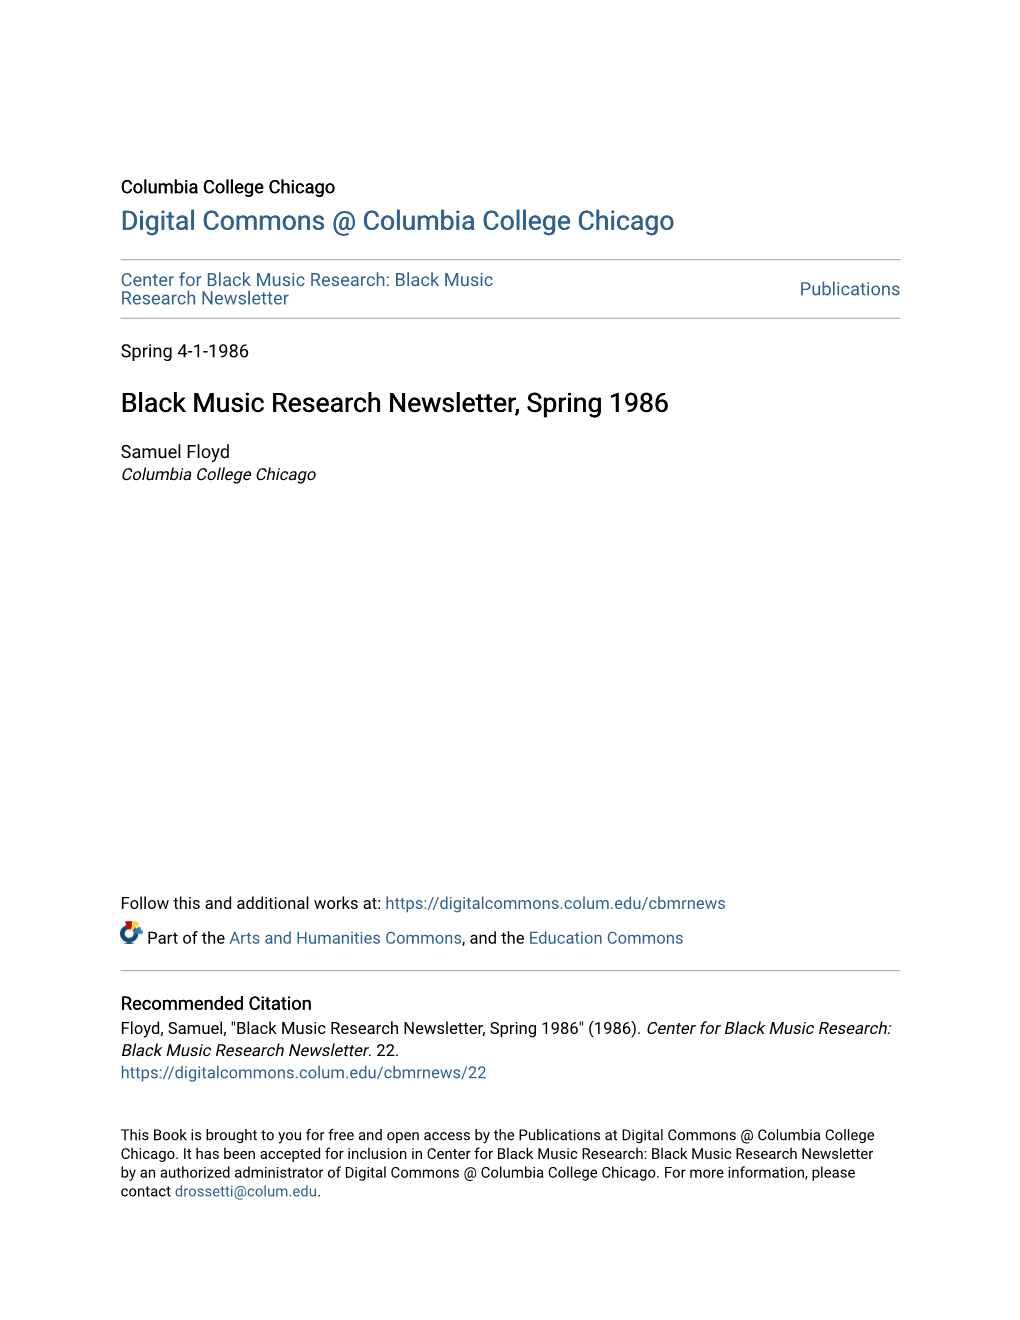 Black Music Research Newsletter, Spring 1986